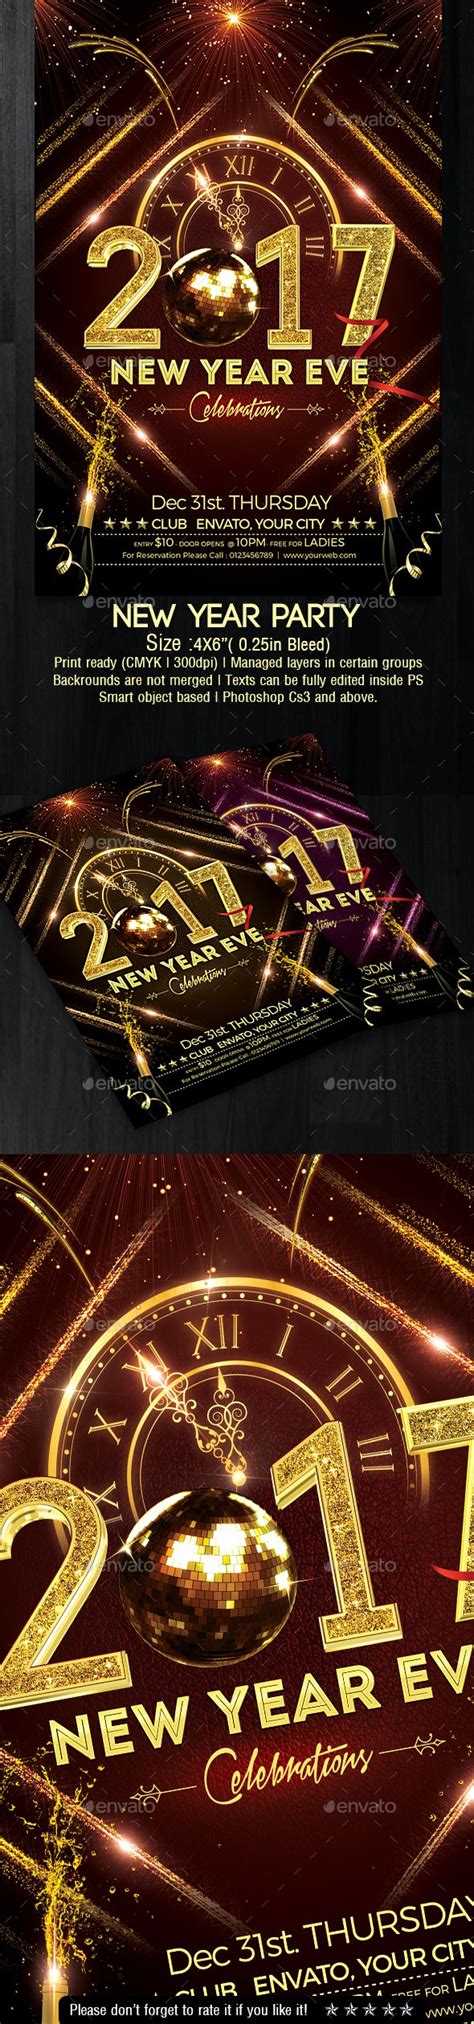 New Year Party Flyer by creativevalues | GraphicRiver